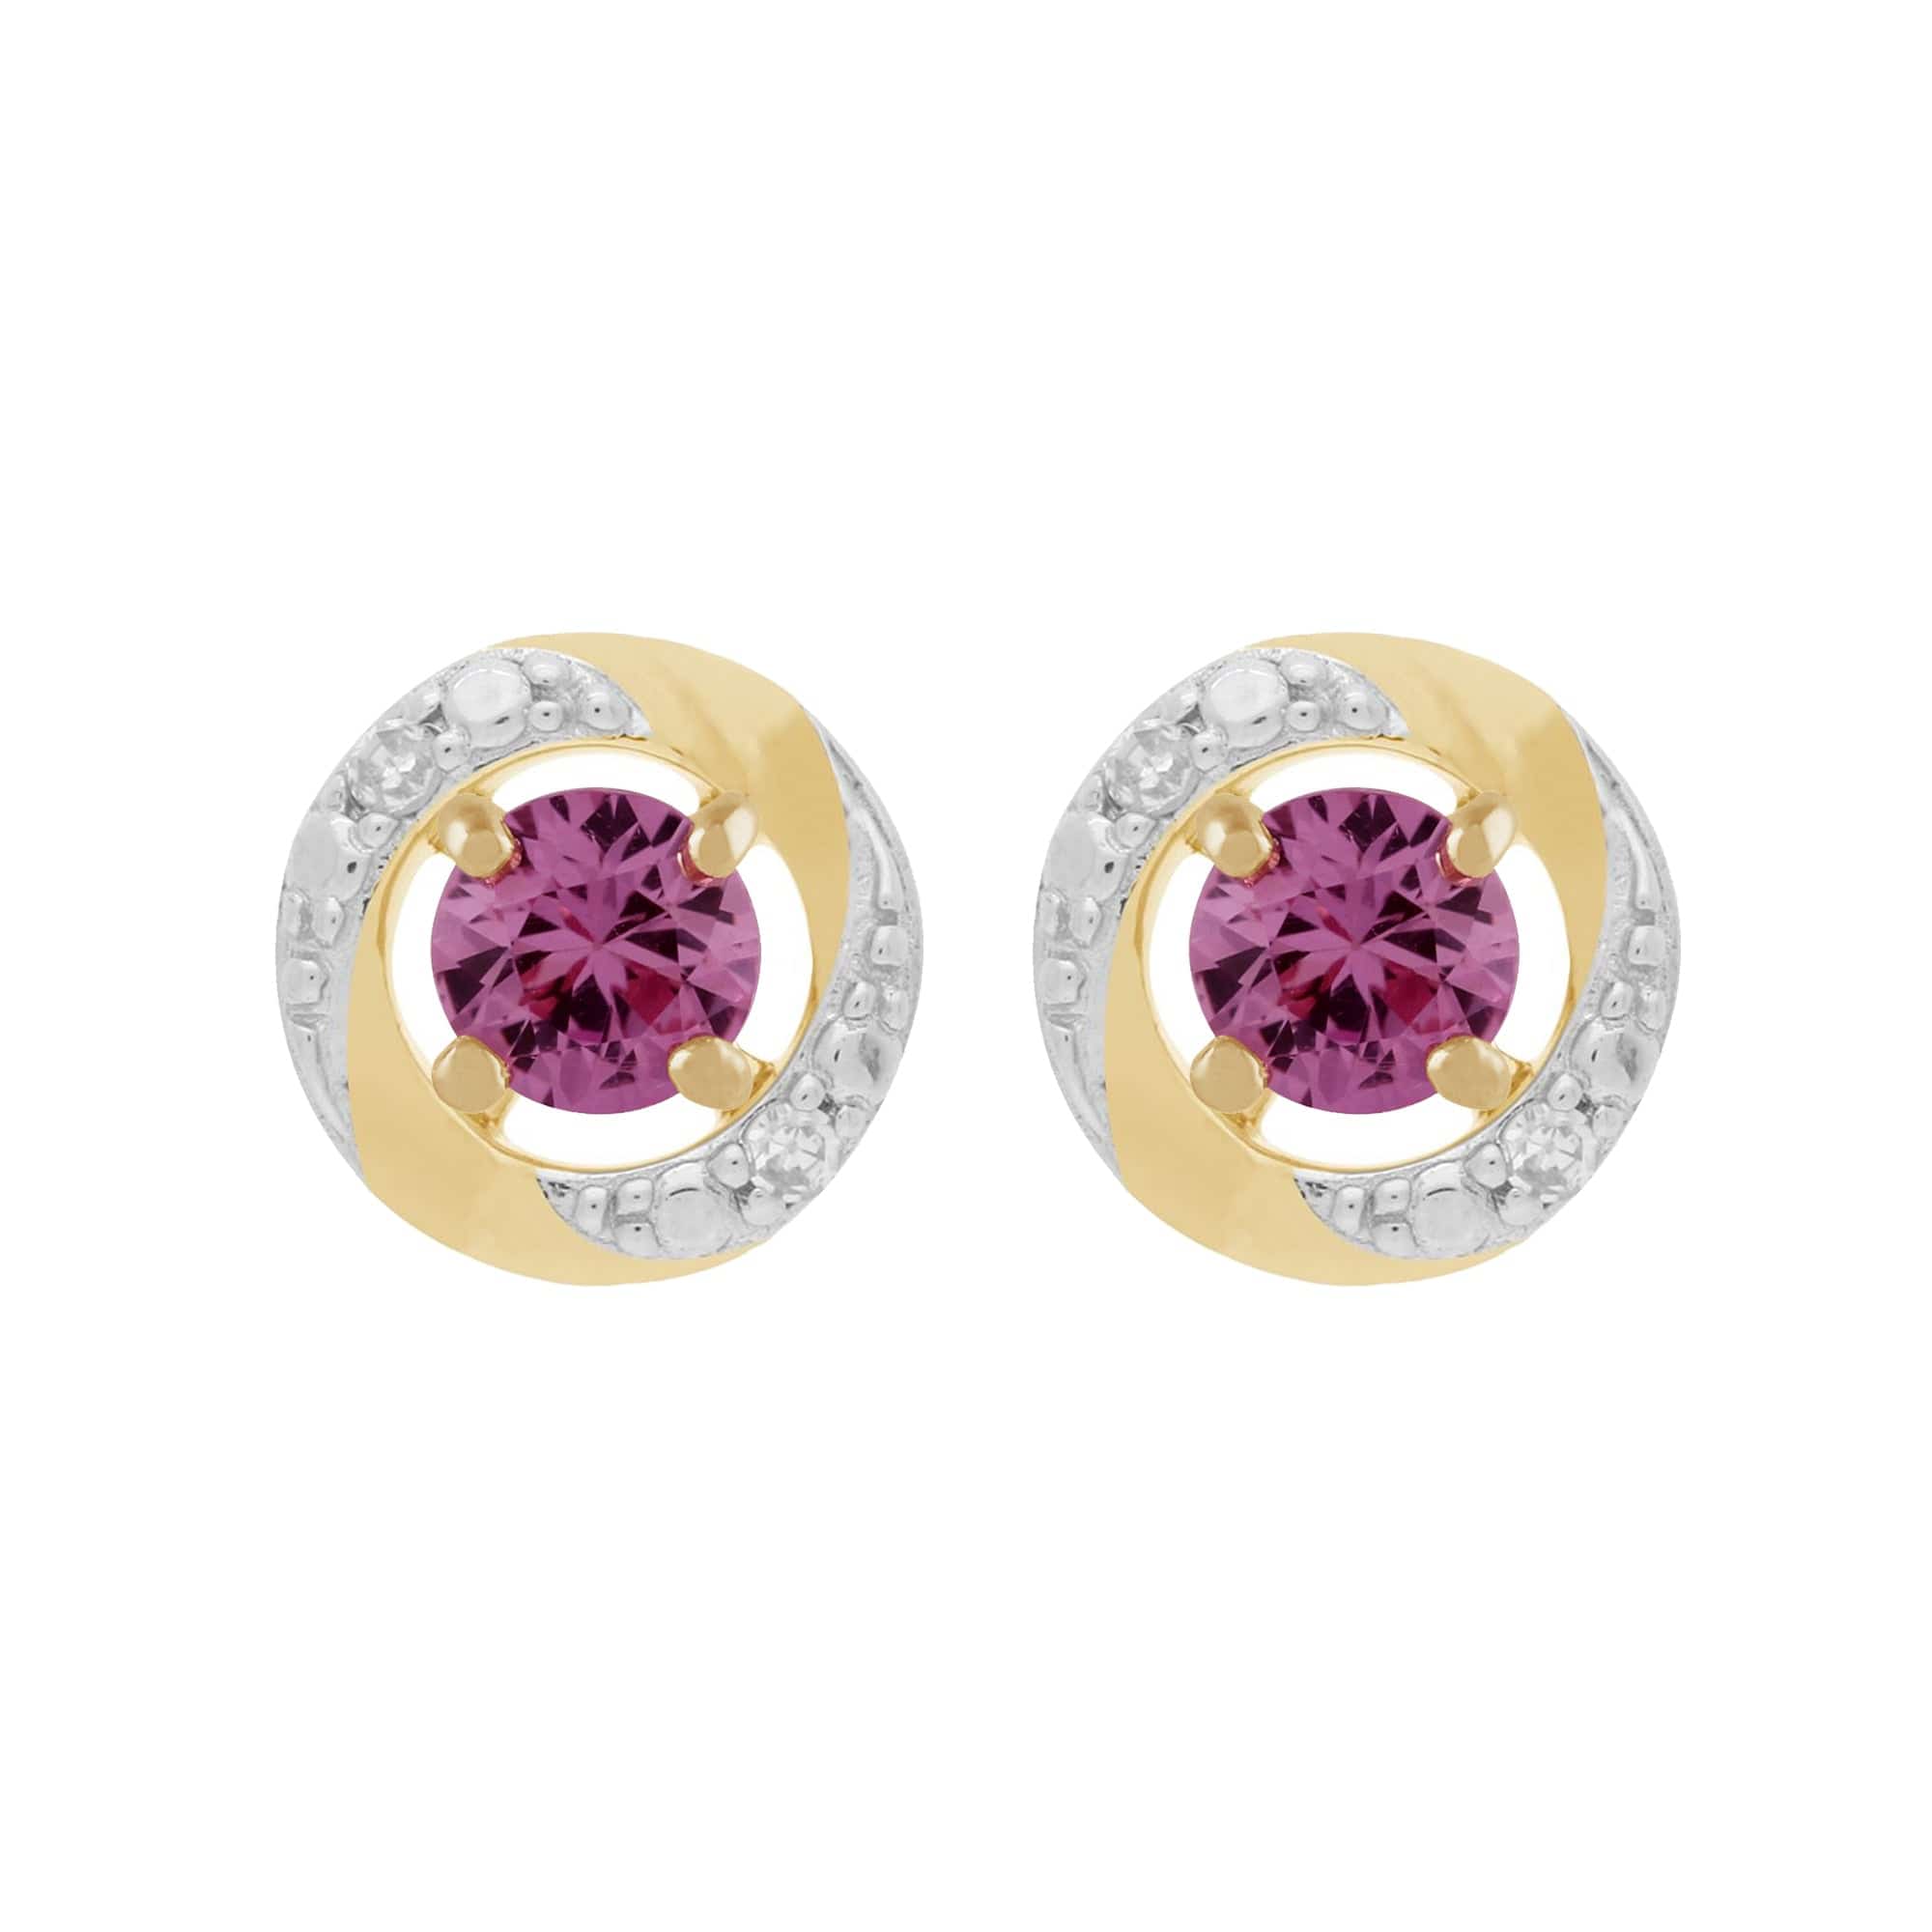 183E0083259-191E0374019 Classic Round Pink Sapphire Stud Earrings with Detachable Diamond Halo Ear Jacket in 9ct Yellow Gold 1